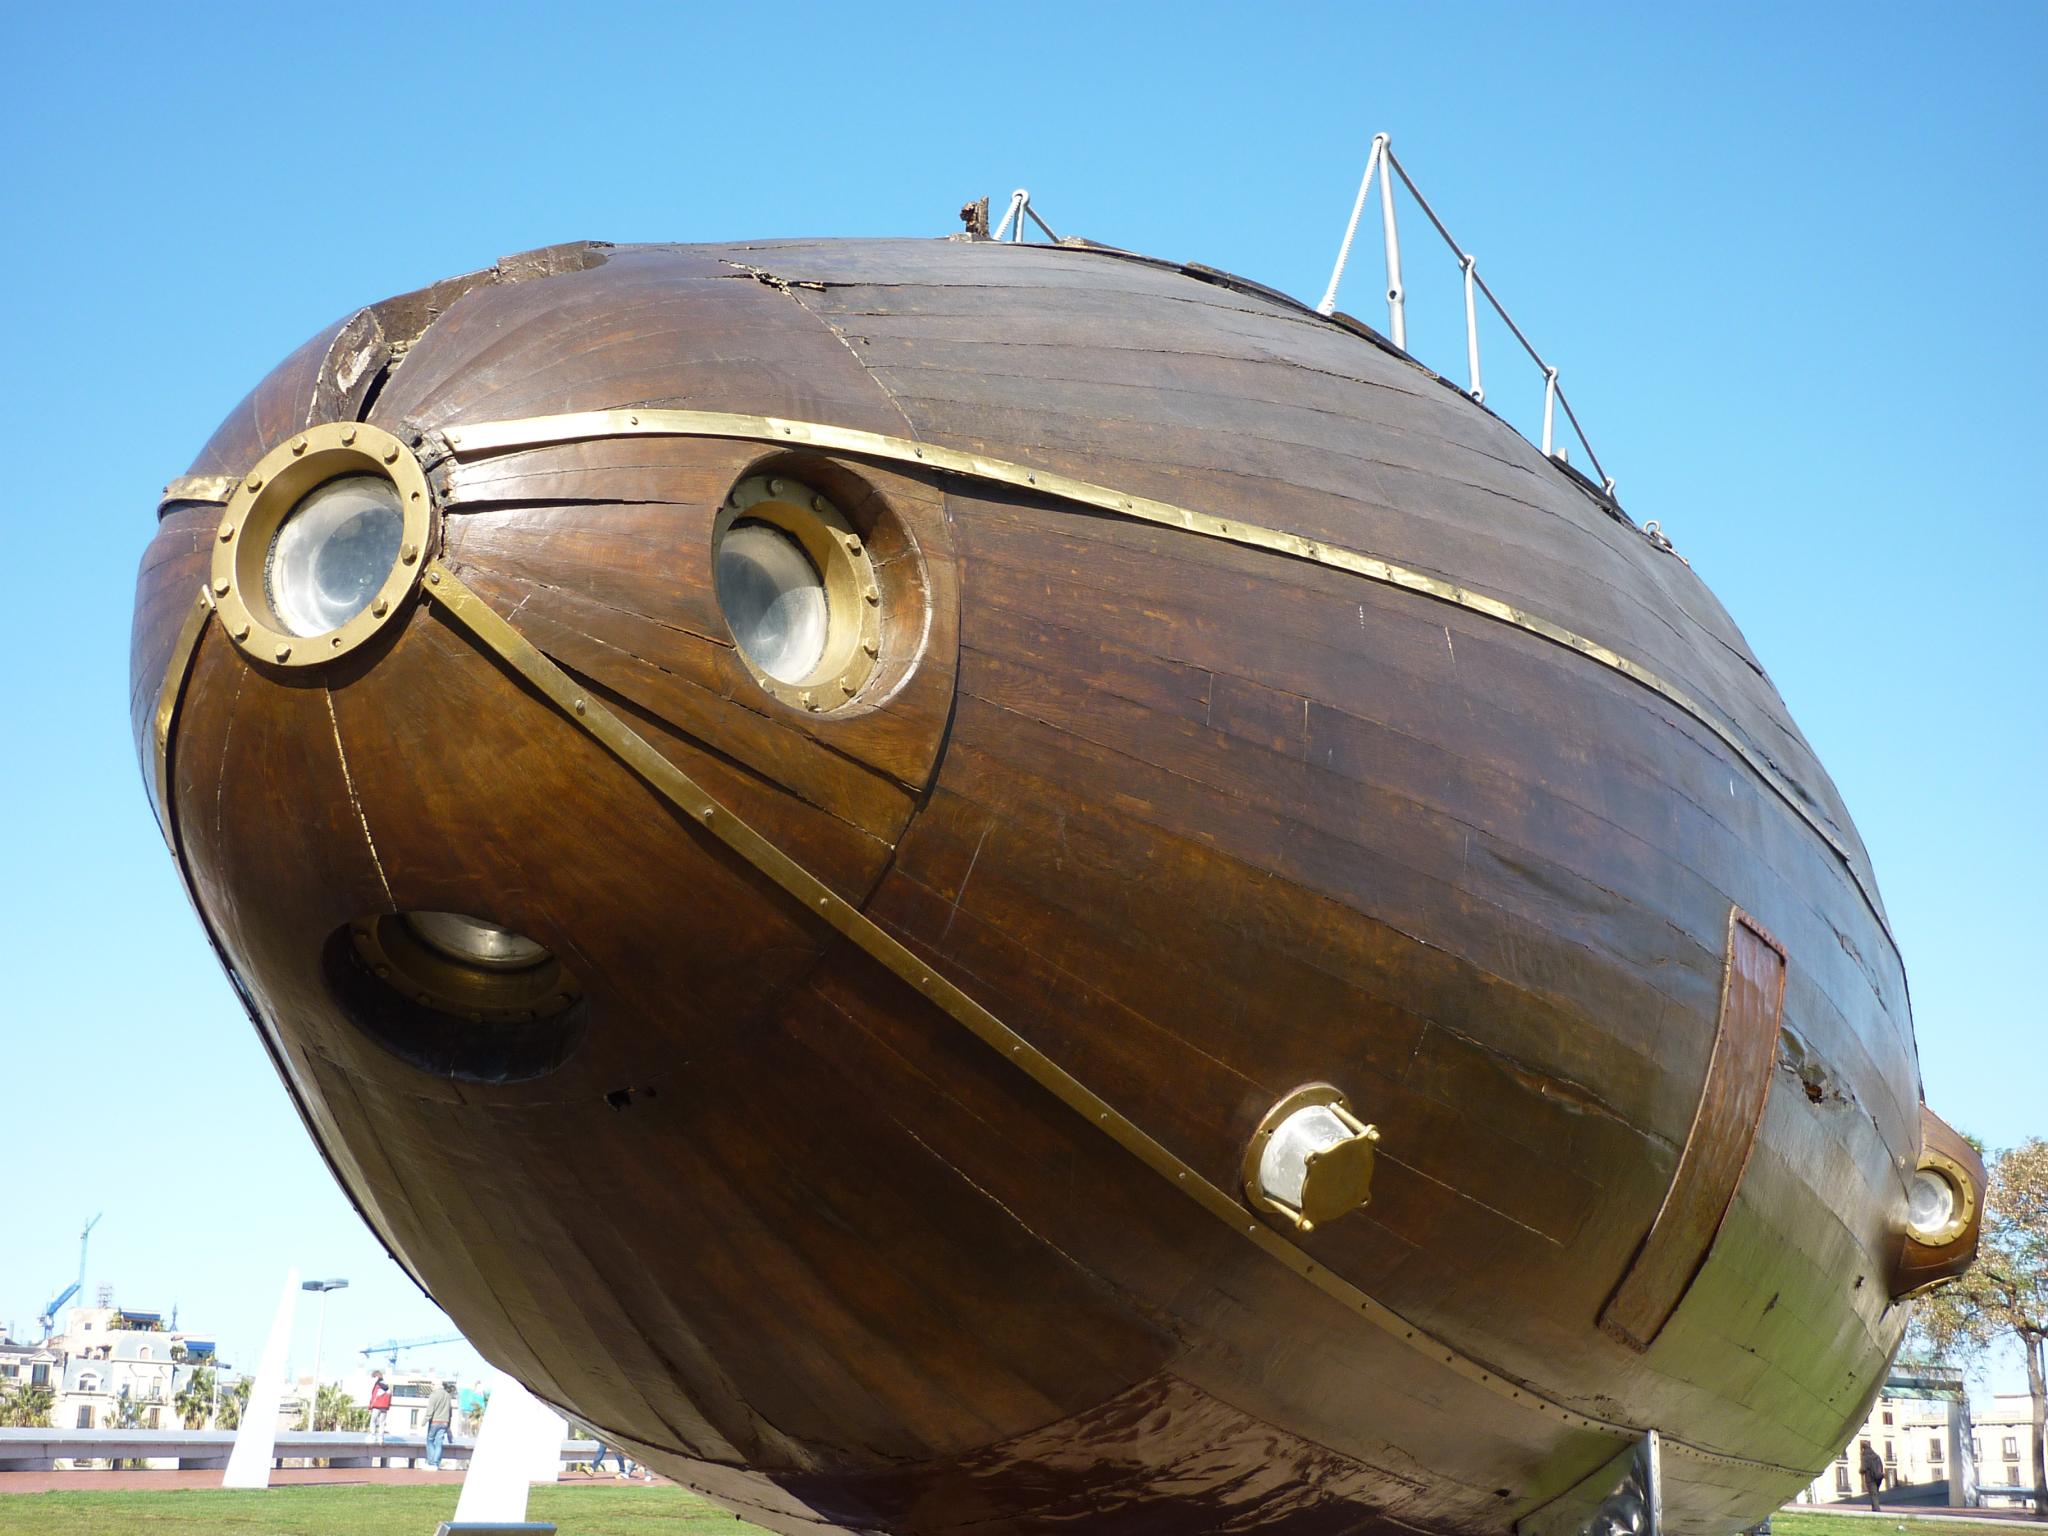 a giant wooden ship is outside by the grass